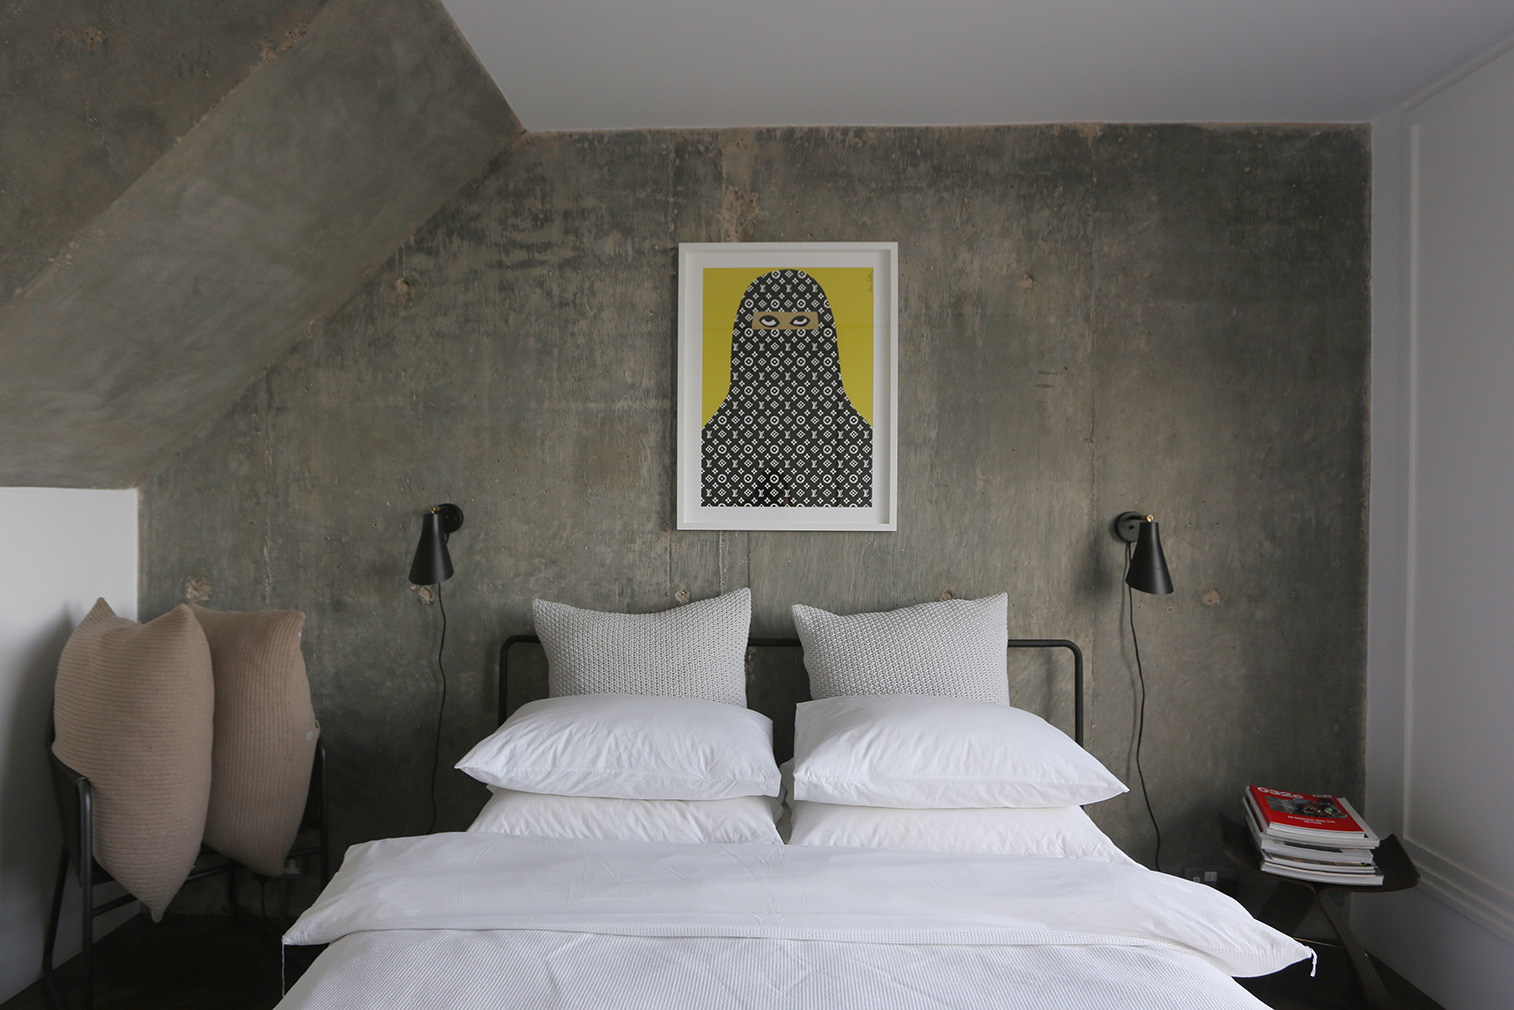 The master bedroom has exposed concrete walls and large picture windows